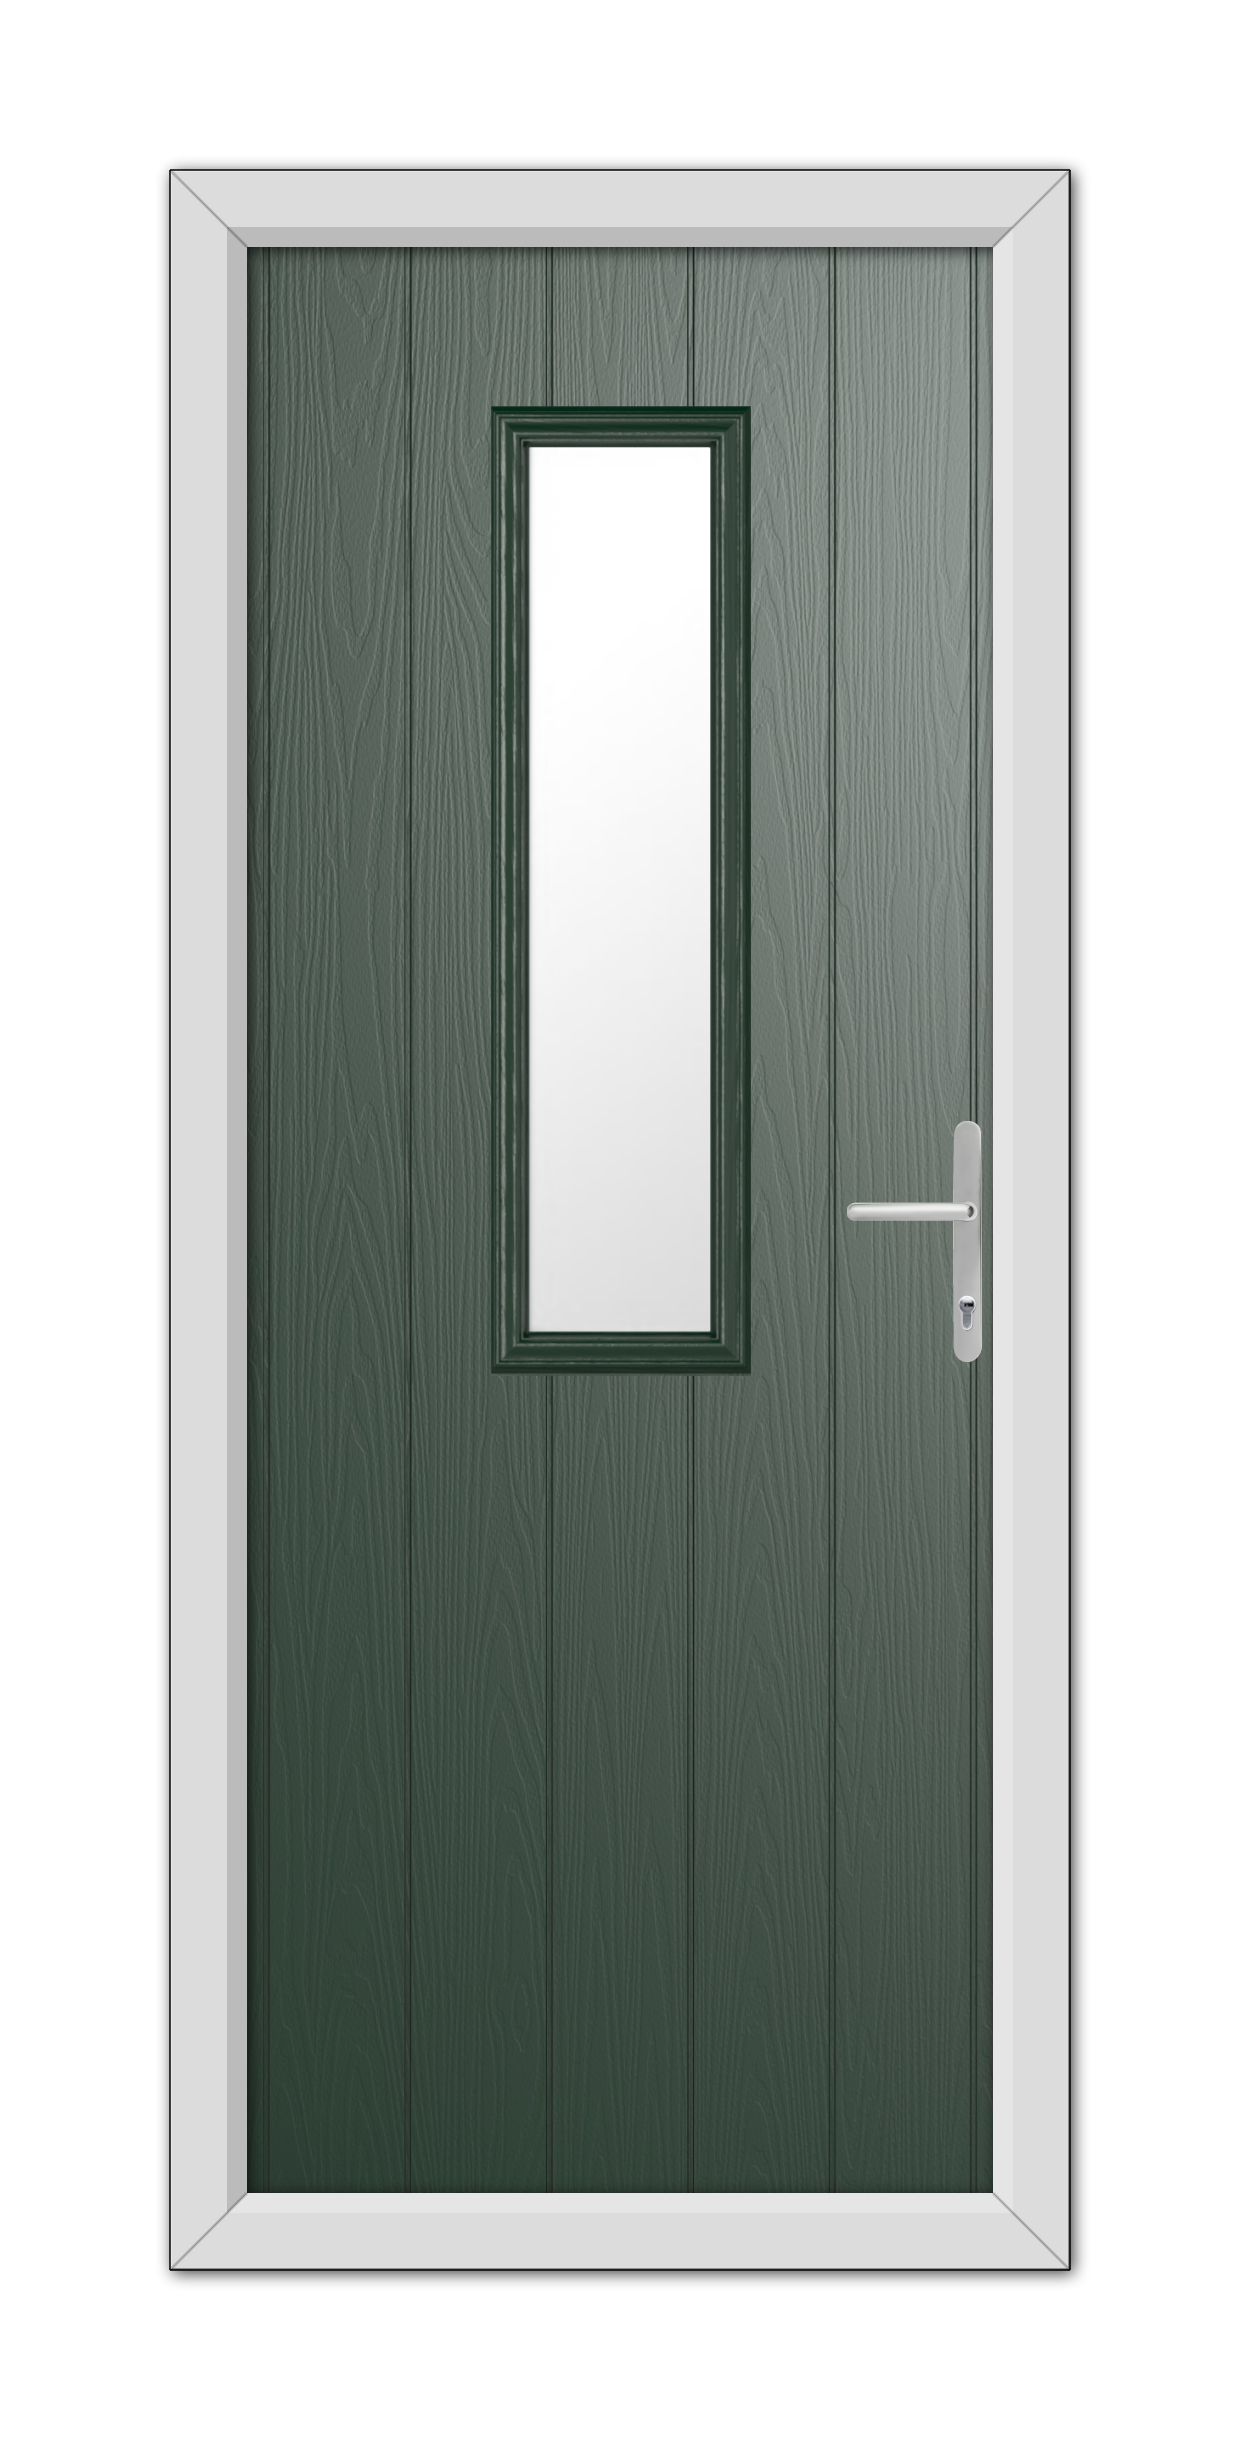 A Green Mowbray Composite Door 48mm Timber Core with a vertical rectangular glass panel and a white handle, framed by a white door frame.